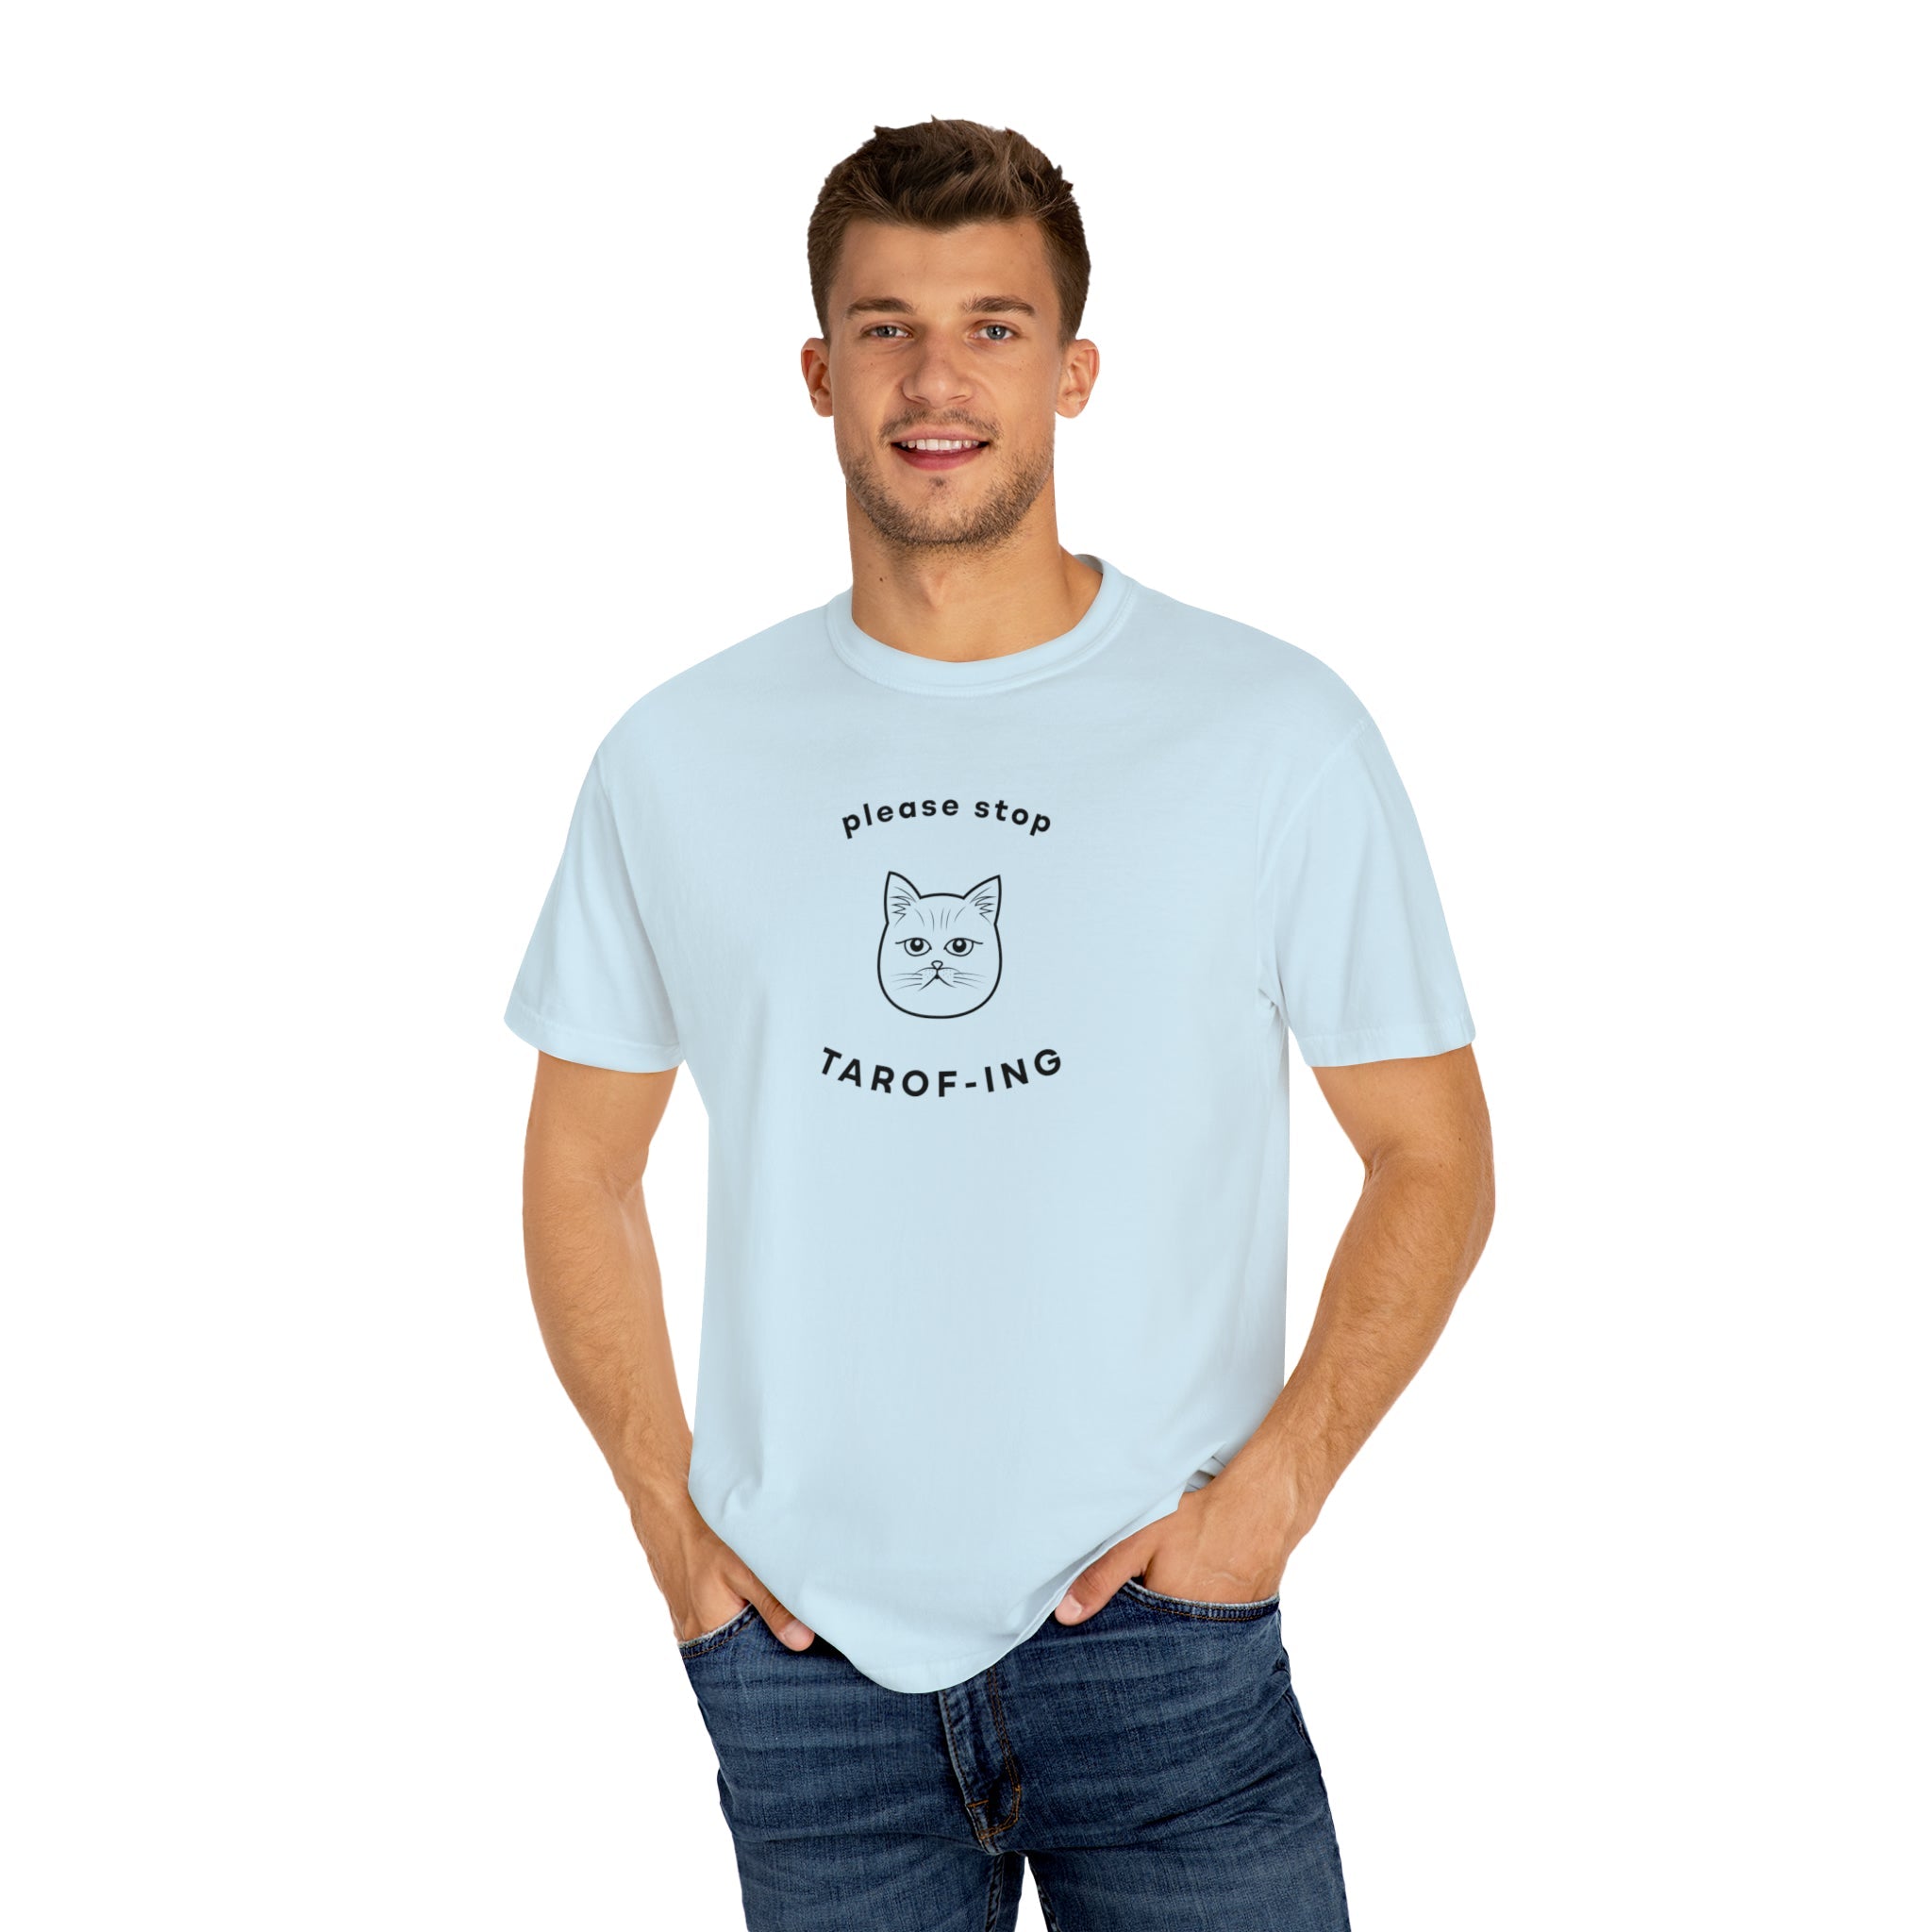 Please Stop Tarof-ing - FUNNY CULTURE SHIRTS